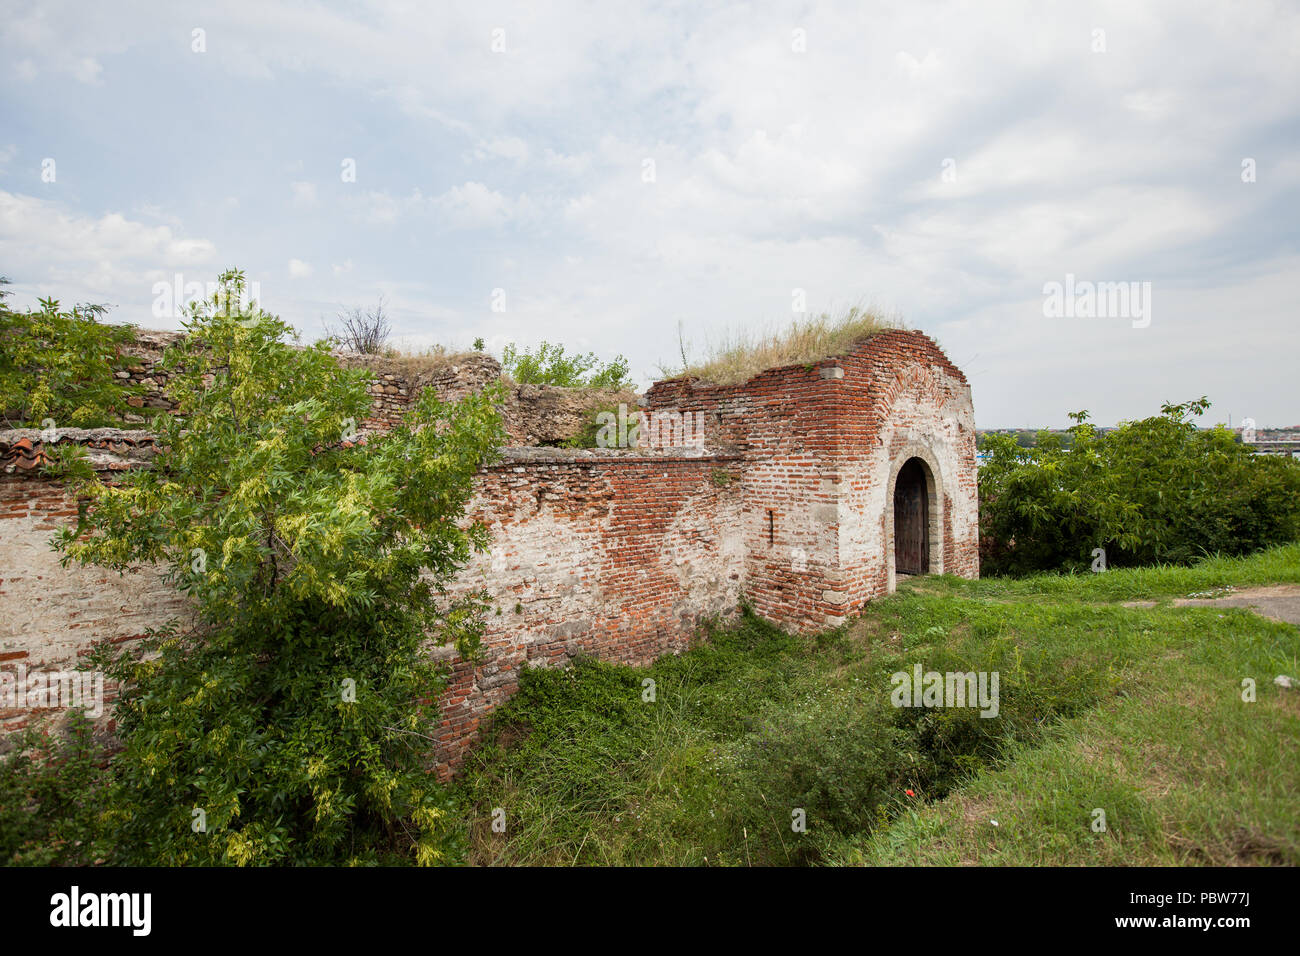 Medieval Fortress Fetislam on the banks of the Danube at the entrance to the town of Kladovo, eastern Serbia Stock Photo